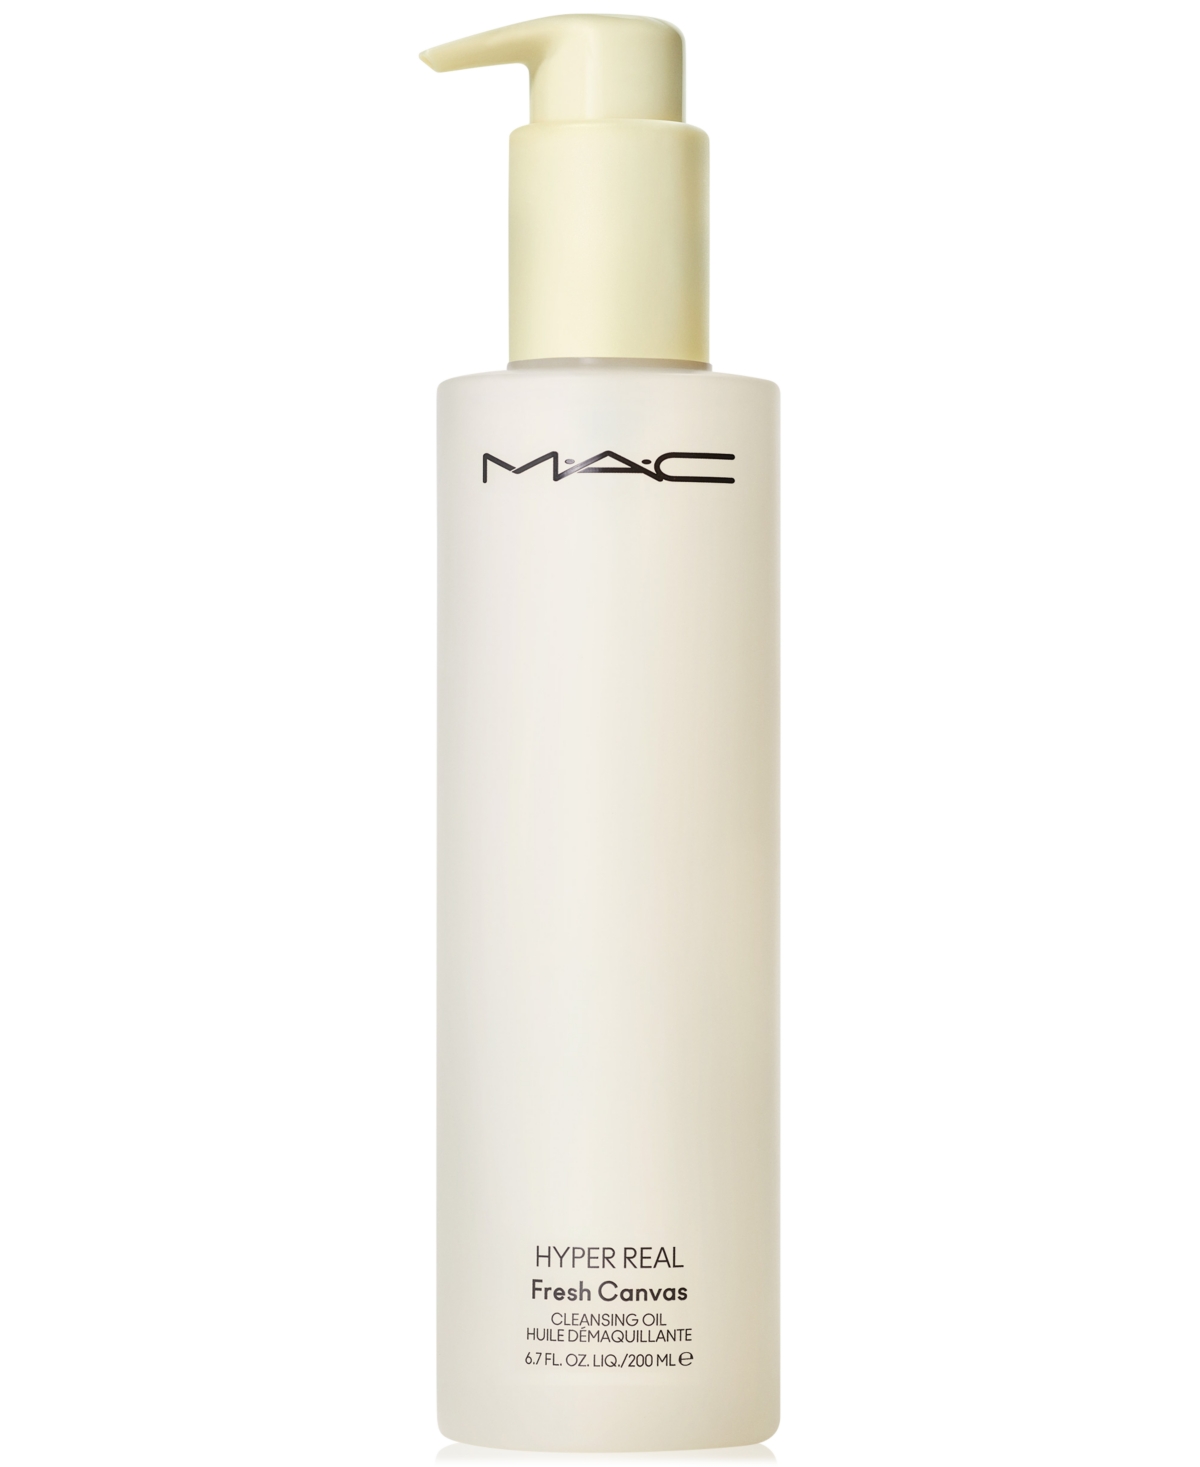 Mac Hyper Real Fresh Canvas Cleansing Oil 6.7 Oz. In No Color